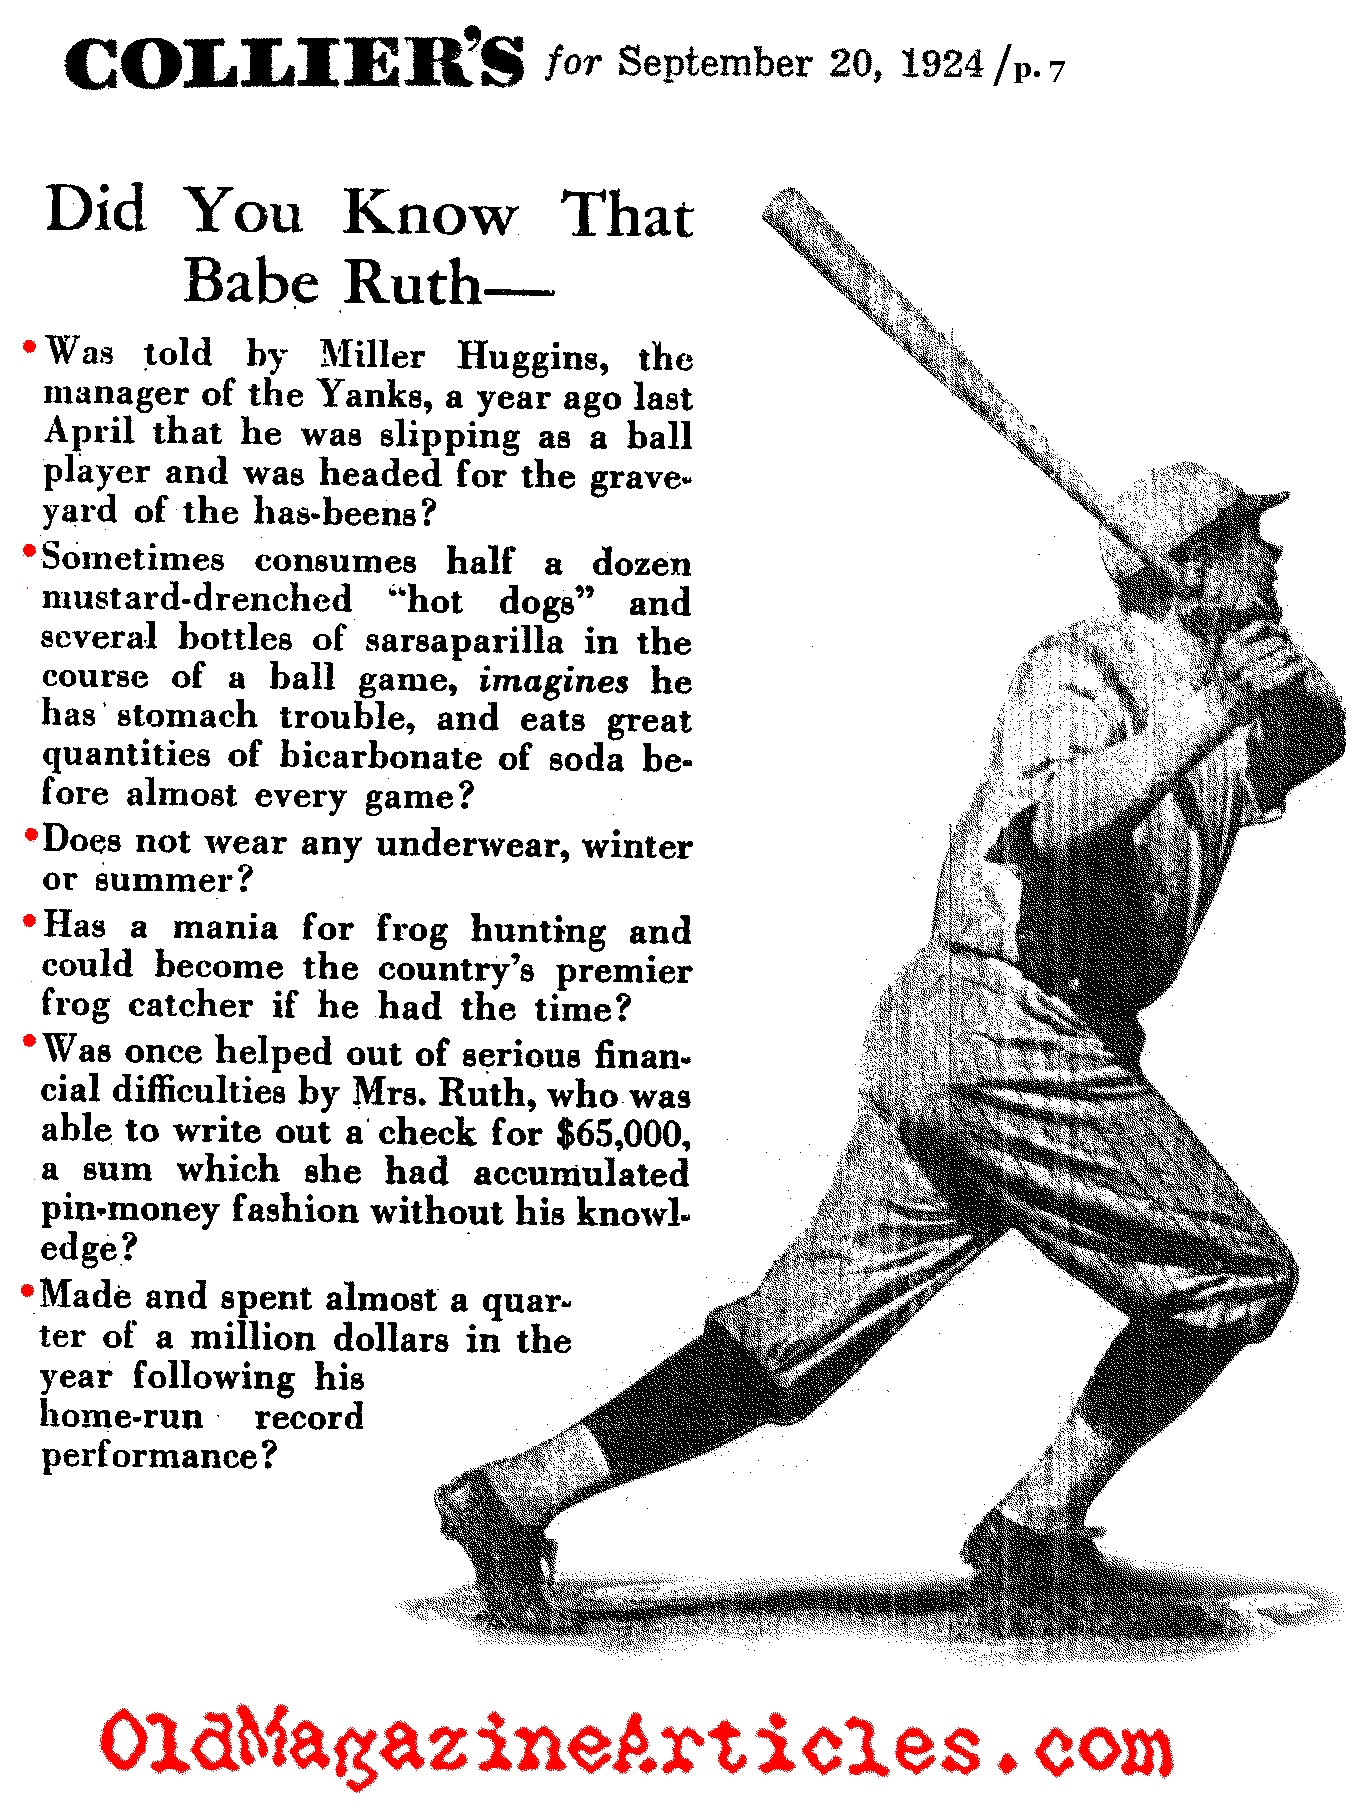 BABE RUTH TRIVIA LIST,BABE RUTH TRIVIA ARTICLE,SMALL TRIVIAL MATTERS ...